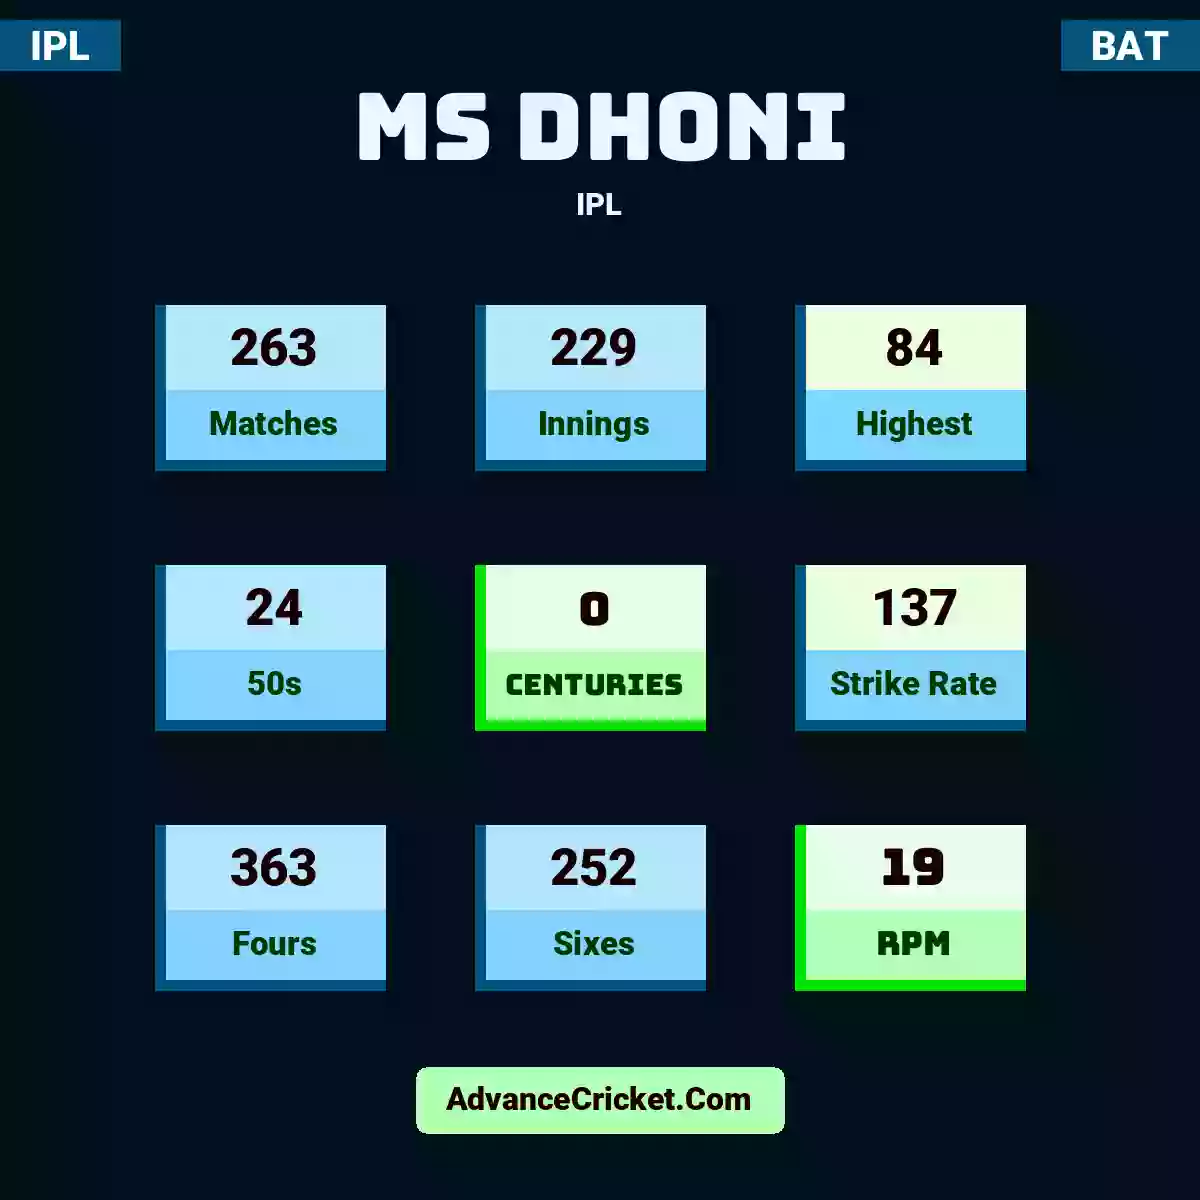 MS Dhoni IPL , MS Dhoni played 263 matches, scored 84 runs as highest, 24 half-centuries, and 0 centuries, with a strike rate of 137. M.Dhoni hit 363 fours and 252 sixes, with an RPM of 19.